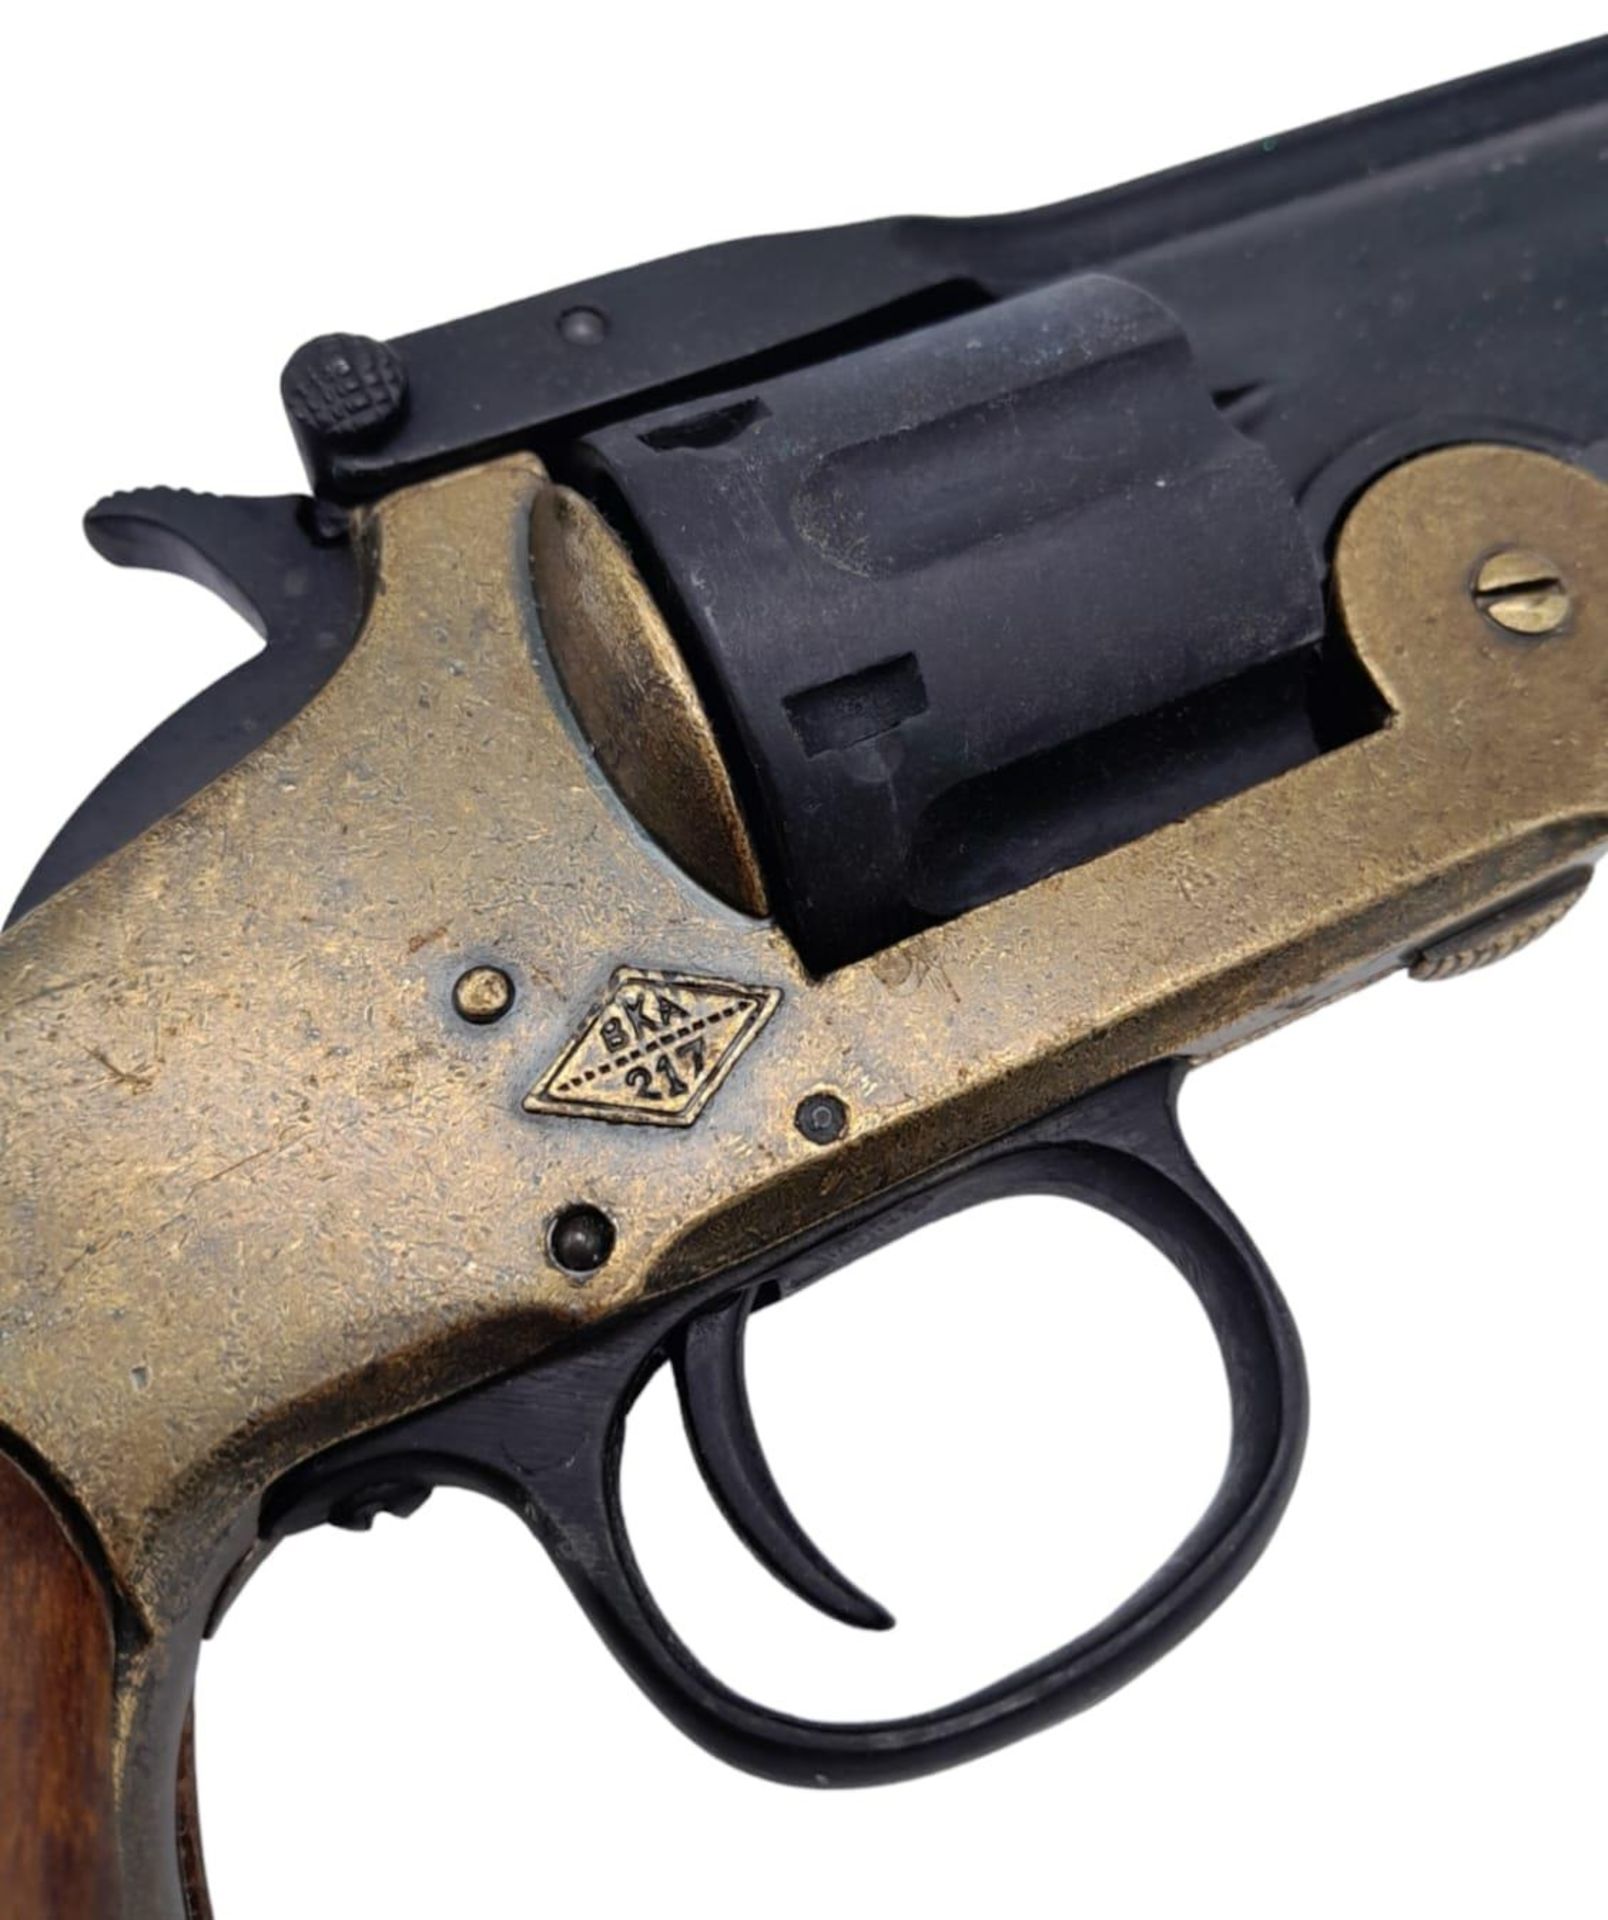 A FULL SIZE METAL REPLICA NAVY COLT SIX CHAMBER PISTOL WITH DRY FIRING ACTION AND REVOLVING BARREL - Image 5 of 8